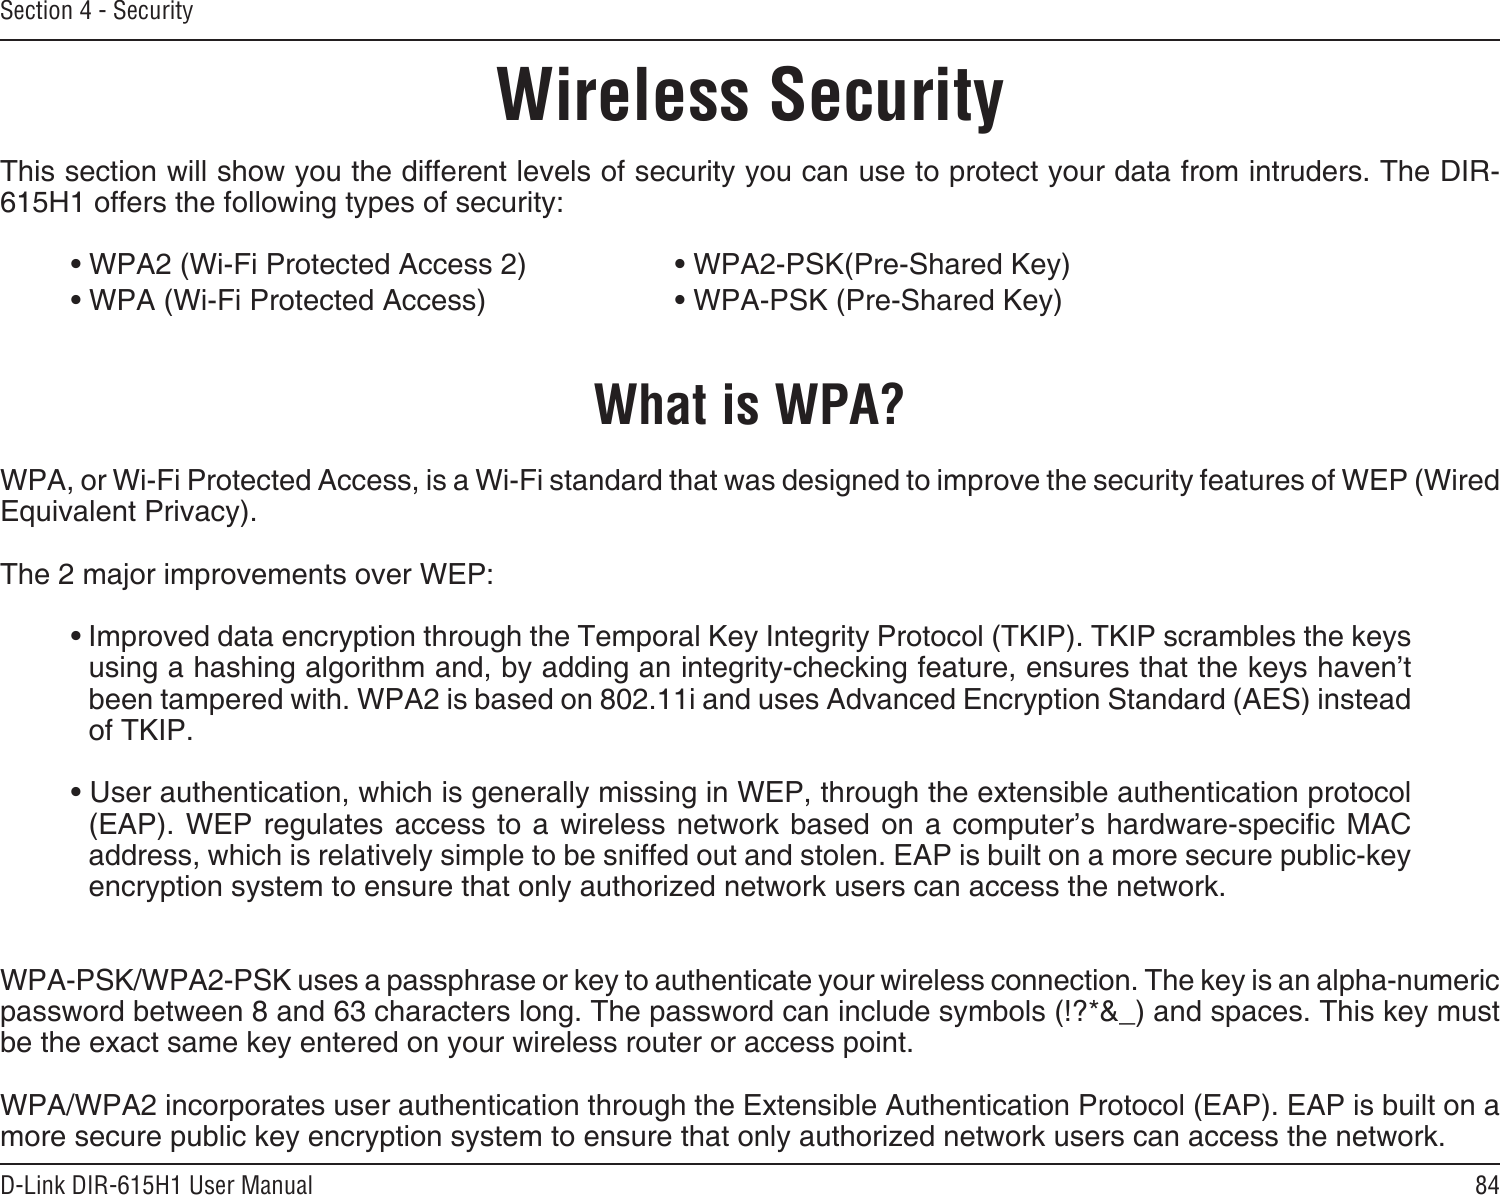 84D-Link DIR-615H1 User ManualSection 4 - SecurityWireless SecurityThis section will show you the different levels of security you can use to protect your data from intruders. The DIR-615H1 offers the following types of security:• WPA2 (Wi-Fi Protected Access 2)     • WPA2-PSK(Pre-Shared Key)• WPA (Wi-Fi Protected Access)      • WPA-PSK (Pre-Shared Key)What is WPA?WPA, or Wi-Fi Protected Access, is a Wi-Fi standard that was designed to improve the security features of WEP (Wired Equivalent Privacy).  The 2 major improvements over WEP: • Improved data encryption through the Temporal Key Integrity Protocol (TKIP). TKIP scrambles the keys using a hashing algorithm and, by adding an integrity-checking feature, ensures that the keys haven’t been tampered with. WPA2 is based on 802.11i and uses Advanced Encryption Standard (AES) instead of TKIP.• User authentication, which is generally missing in WEP, through the extensible authentication protocol (EAP). WEP  regulates access to a wireless  network based on  a computer’s  hardware-specic MAC address, which is relatively simple to be sniffed out and stolen. EAP is built on a more secure public-key encryption system to ensure that only authorized network users can access the network.WPA-PSK/WPA2-PSK uses a passphrase or key to authenticate your wireless connection. The key is an alpha-numeric password between 8 and 63 characters long. The password can include symbols (!?*&amp;_) and spaces. This key must be the exact same key entered on your wireless router or access point.WPA/WPA2 incorporates user authentication through the Extensible Authentication Protocol (EAP). EAP is built on a more secure public key encryption system to ensure that only authorized network users can access the network.